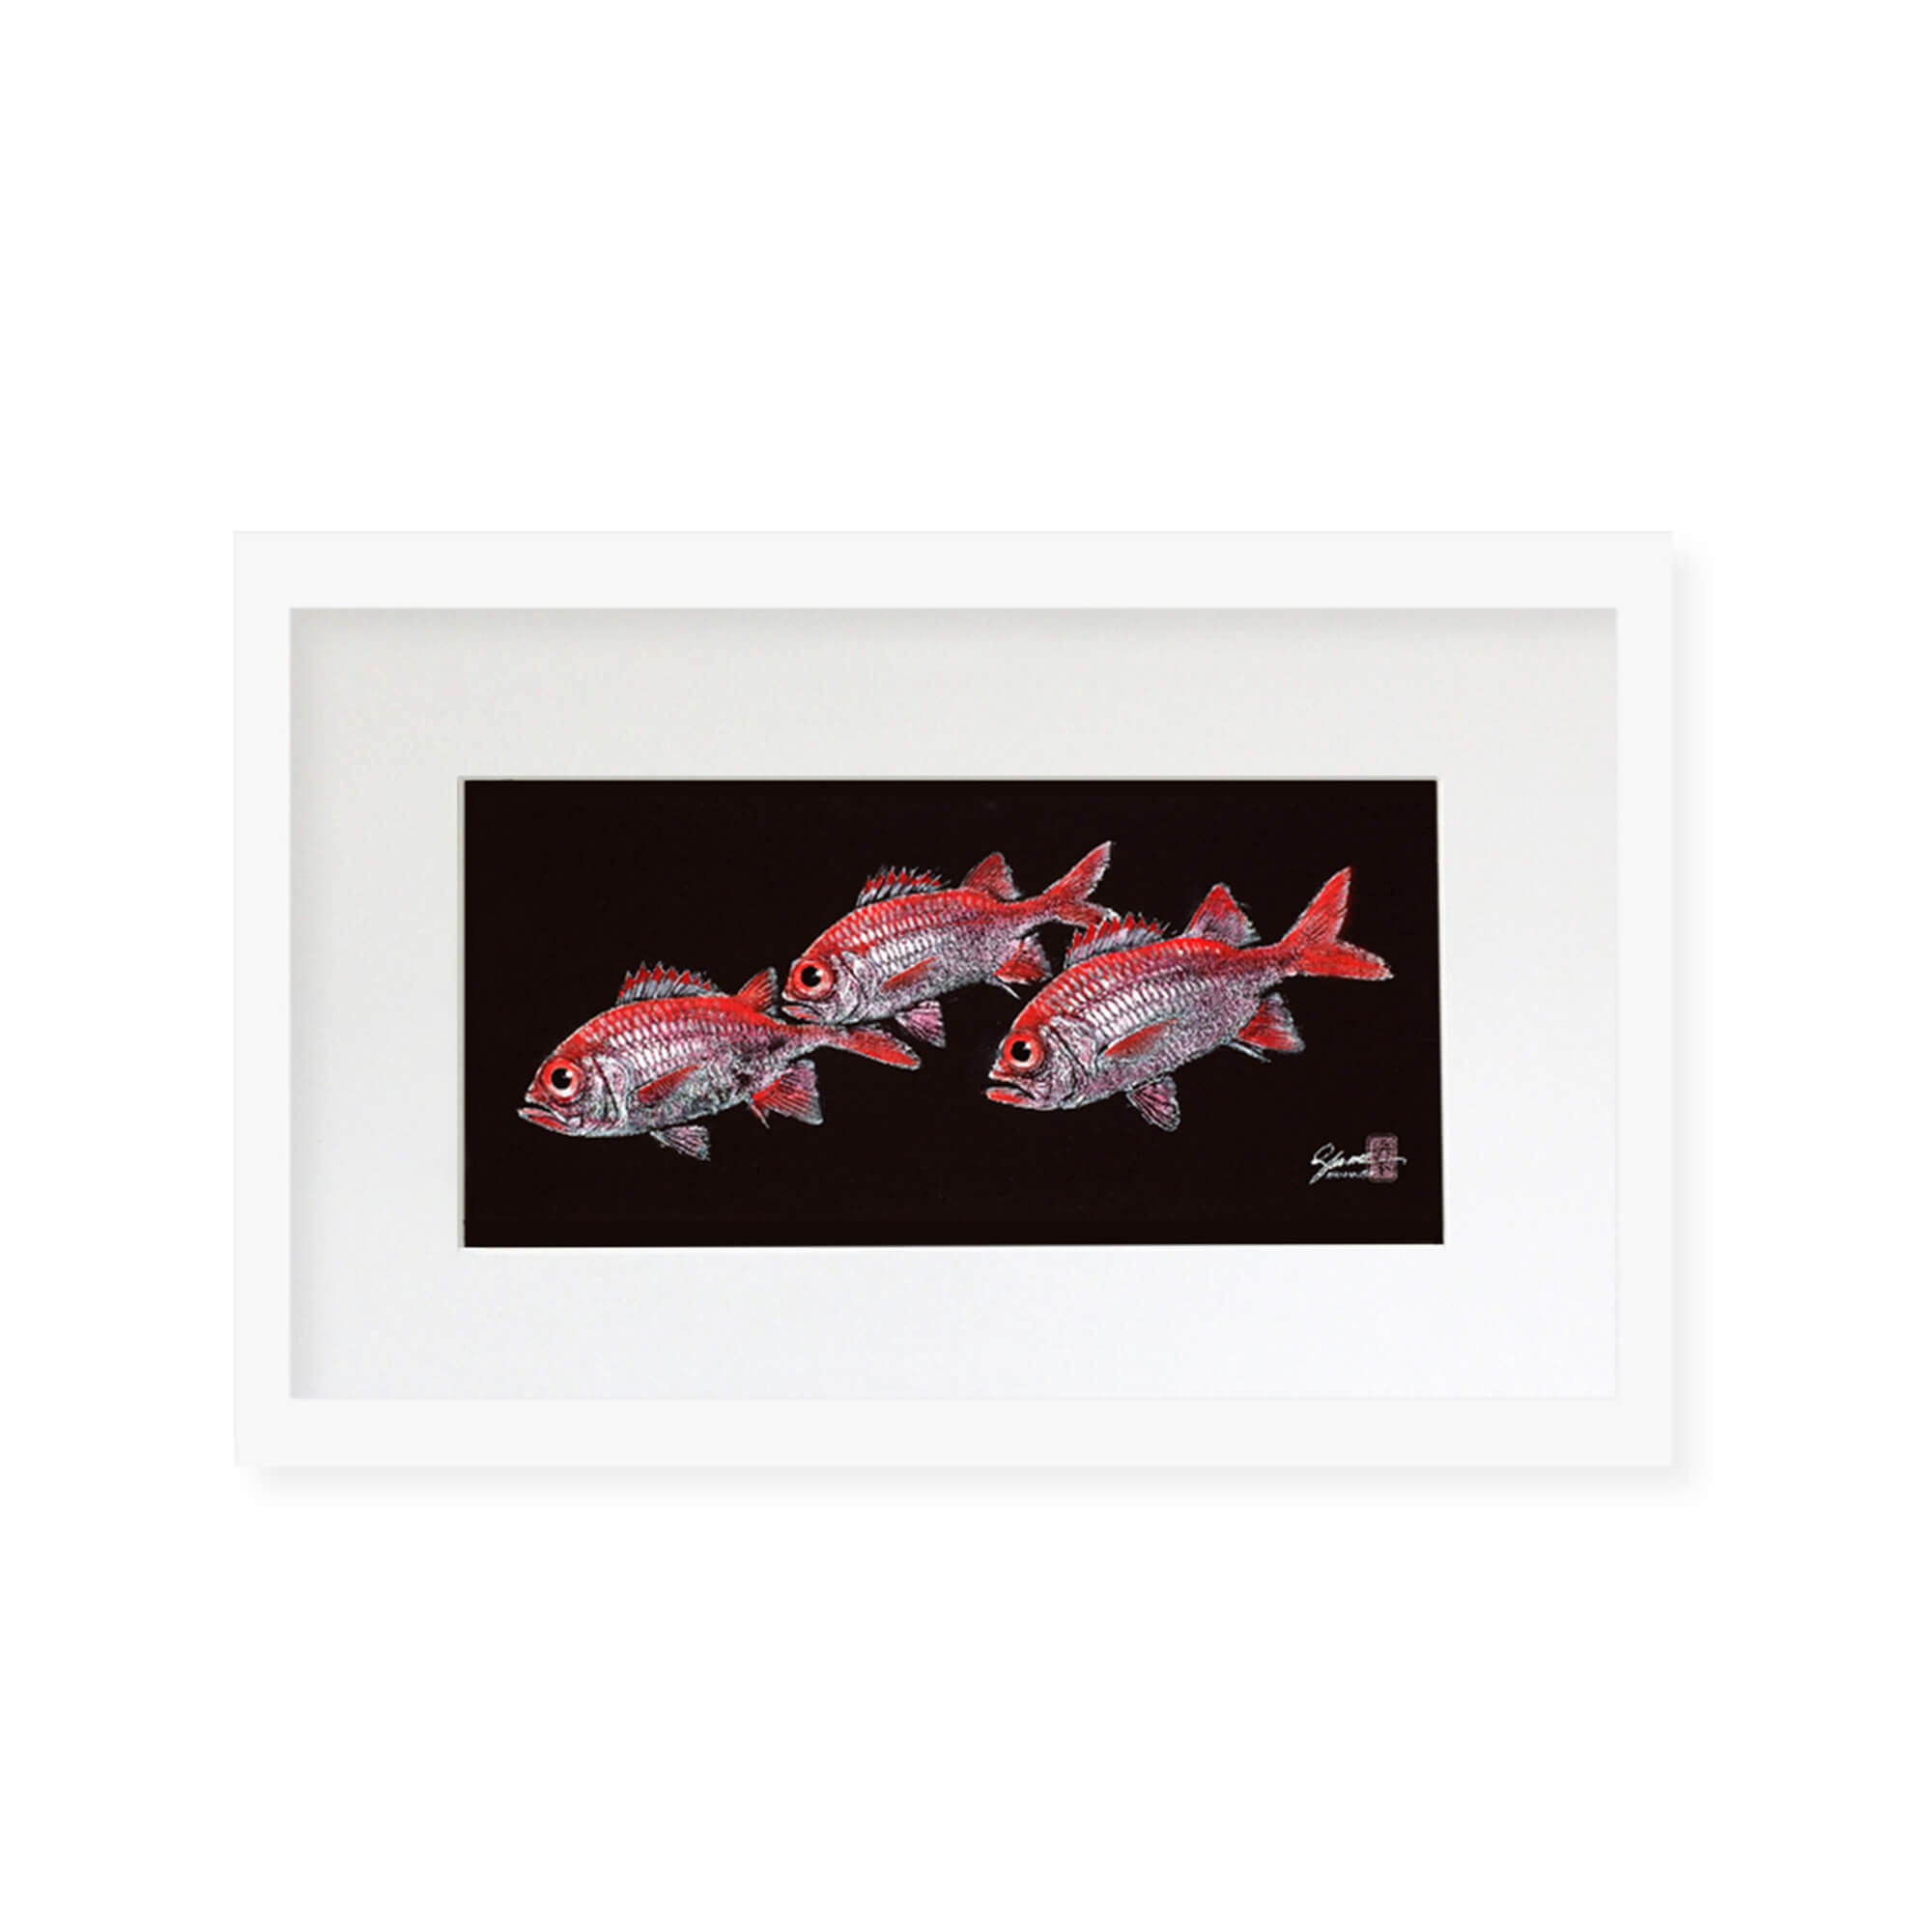 Framed matted print of Menpachi (also known as Flagtails and Soldierfish) by Hawaii gyotaku artist Shane Hamamoto